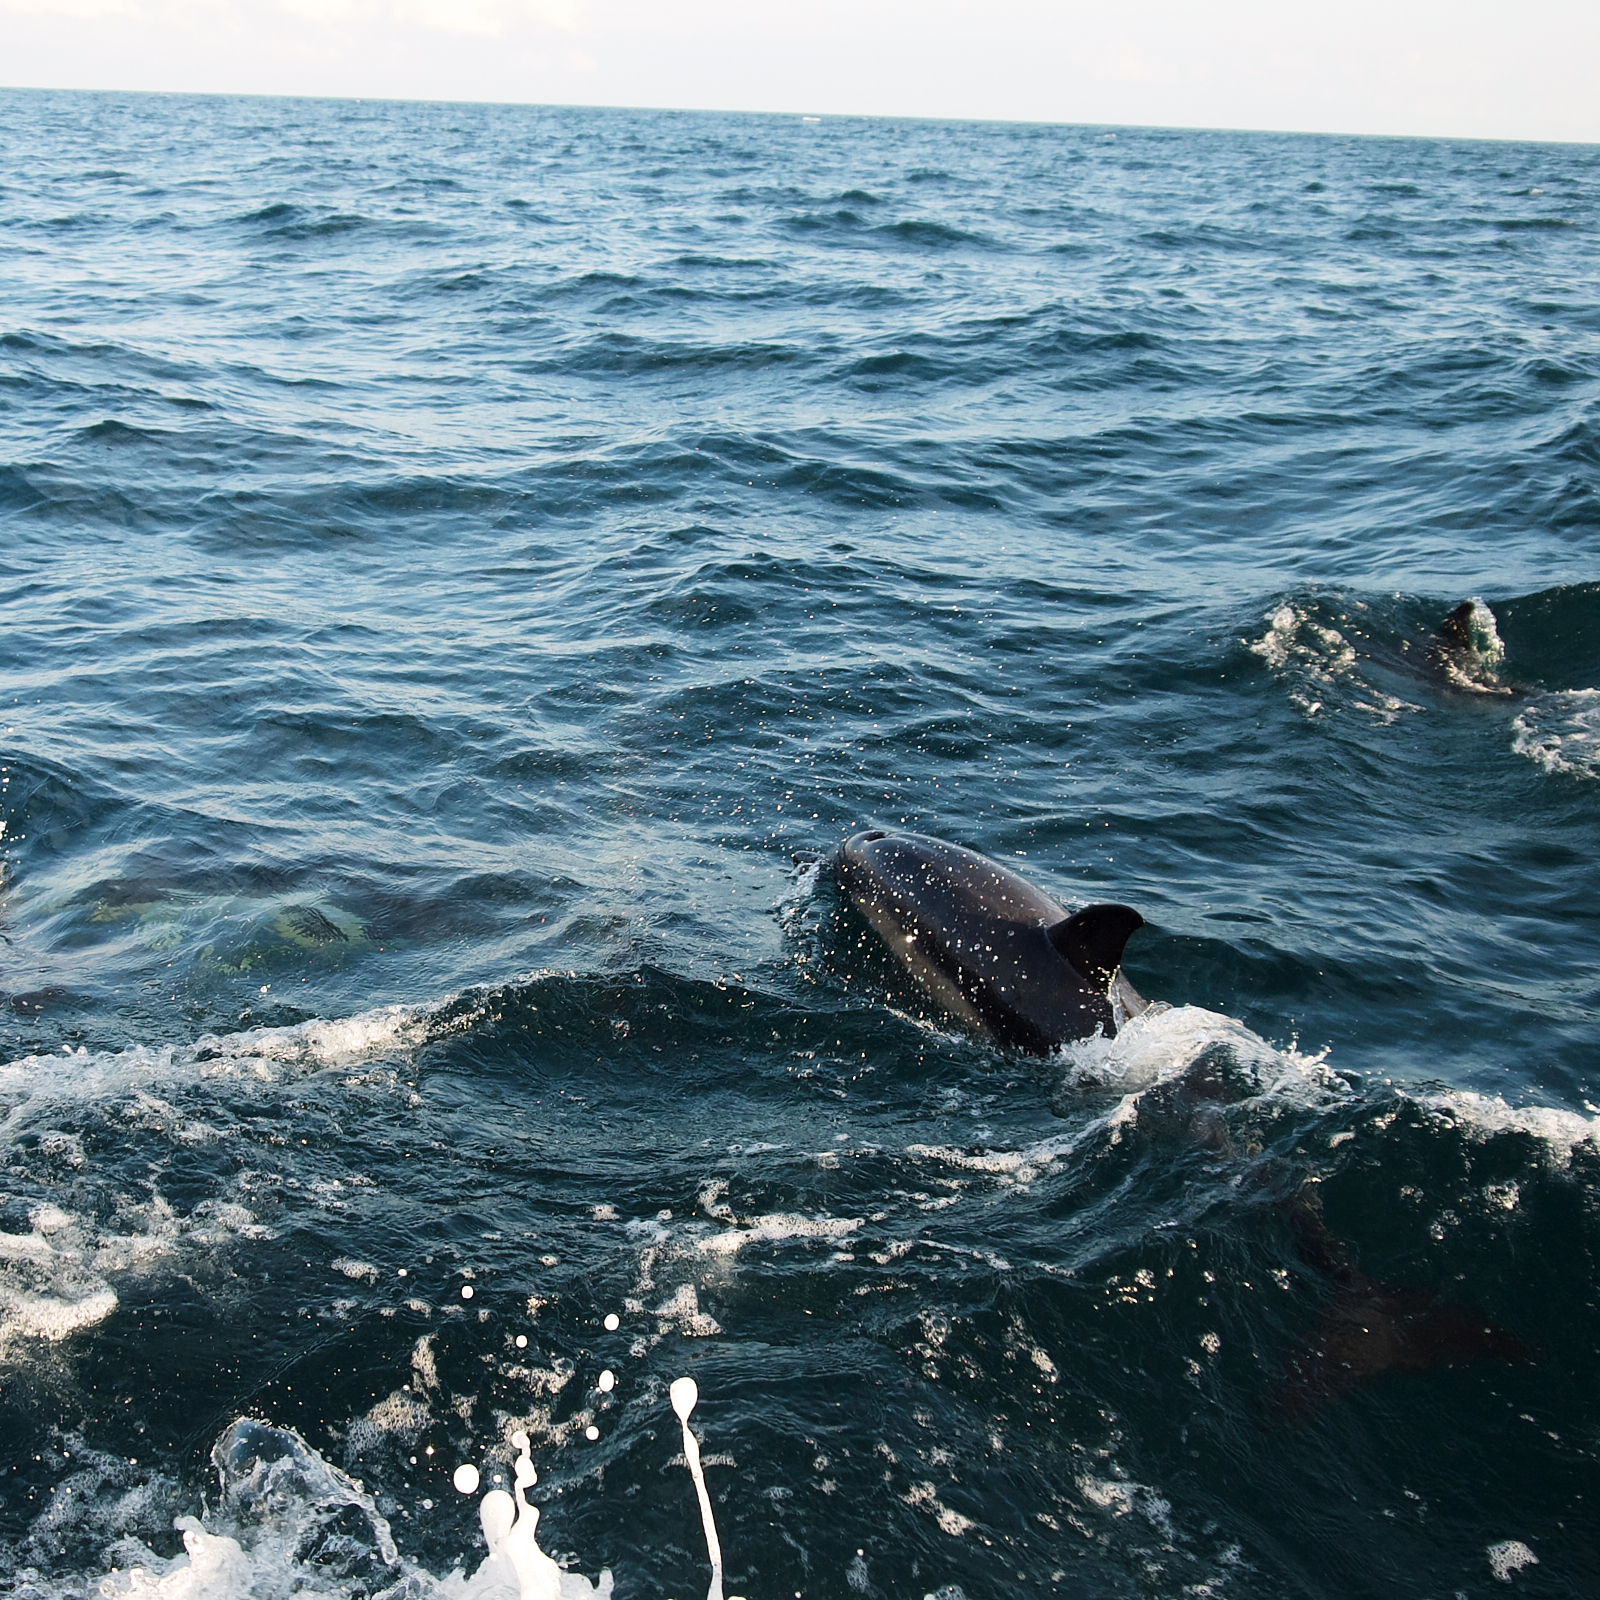 Dolphins surge in deep blue water